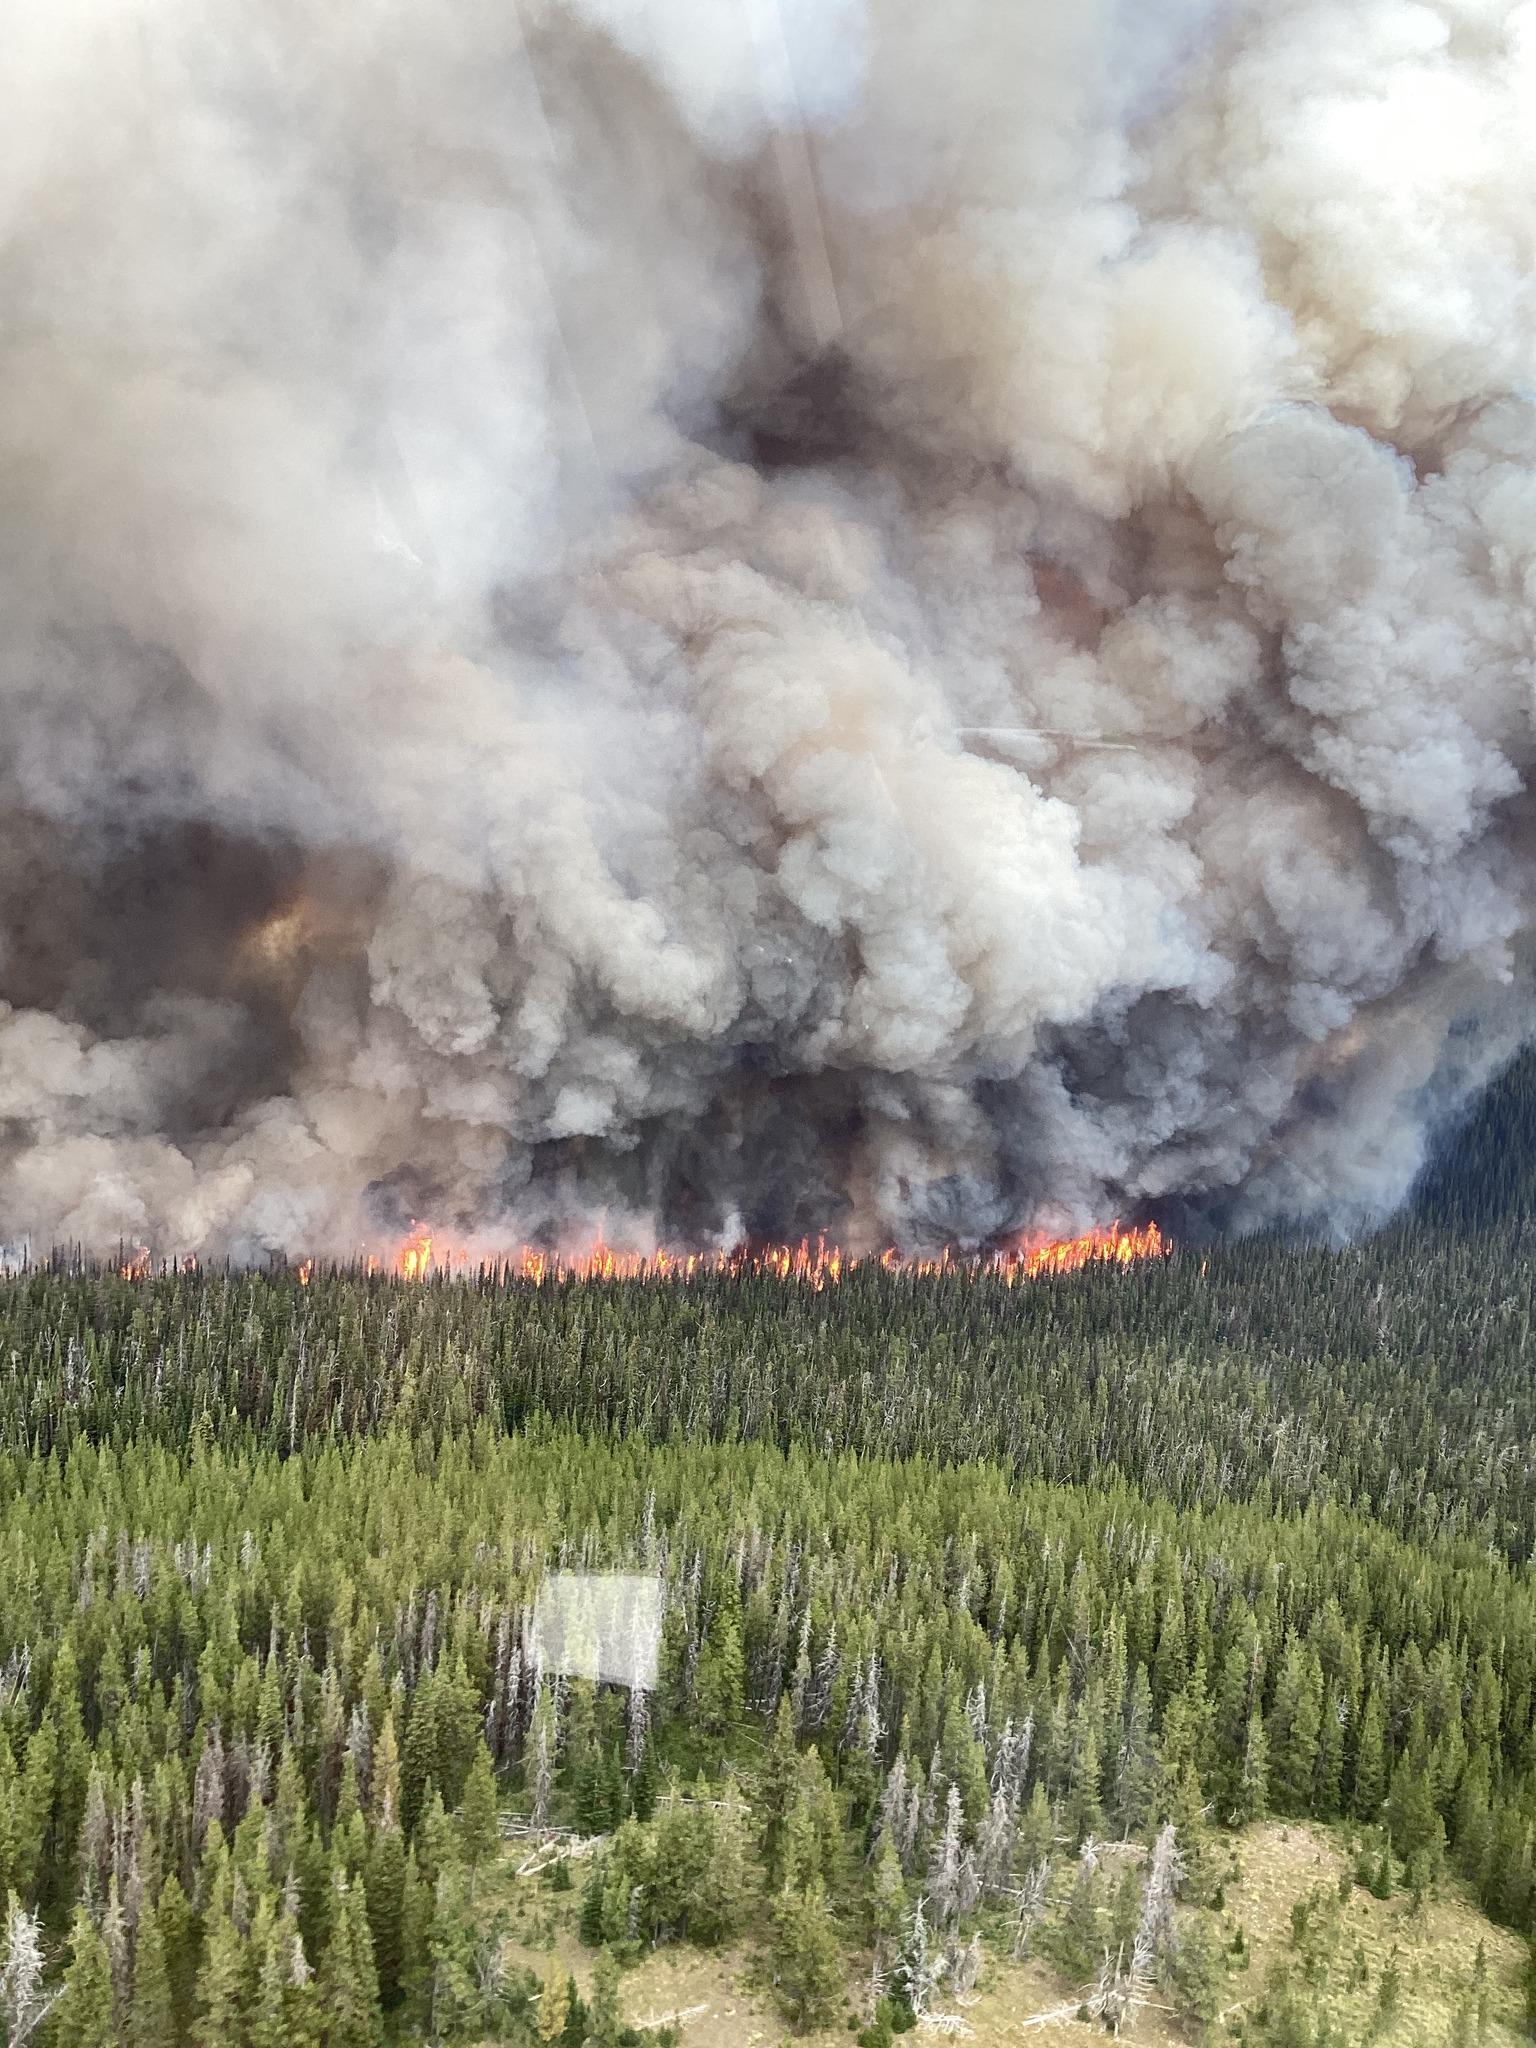 An ominous wall of grey and white smoke fills the air in the distance due to a wildfire in the forest